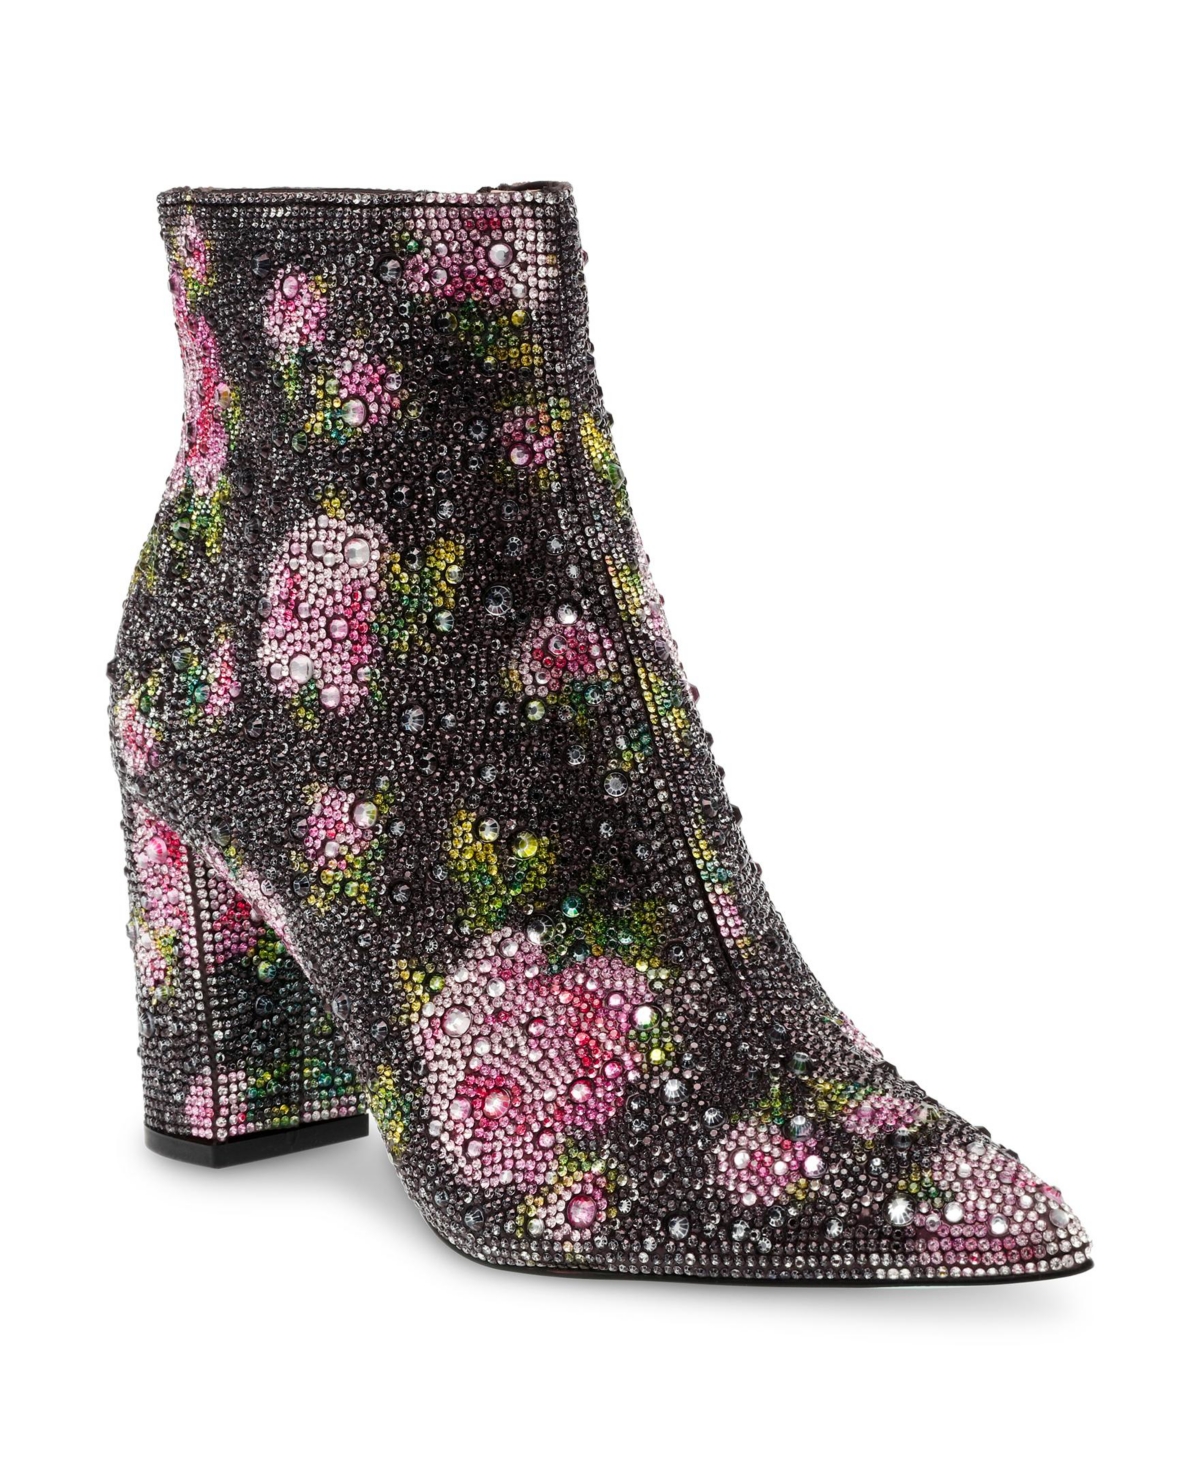 Women's Cady Evening Booties - Pink Floral